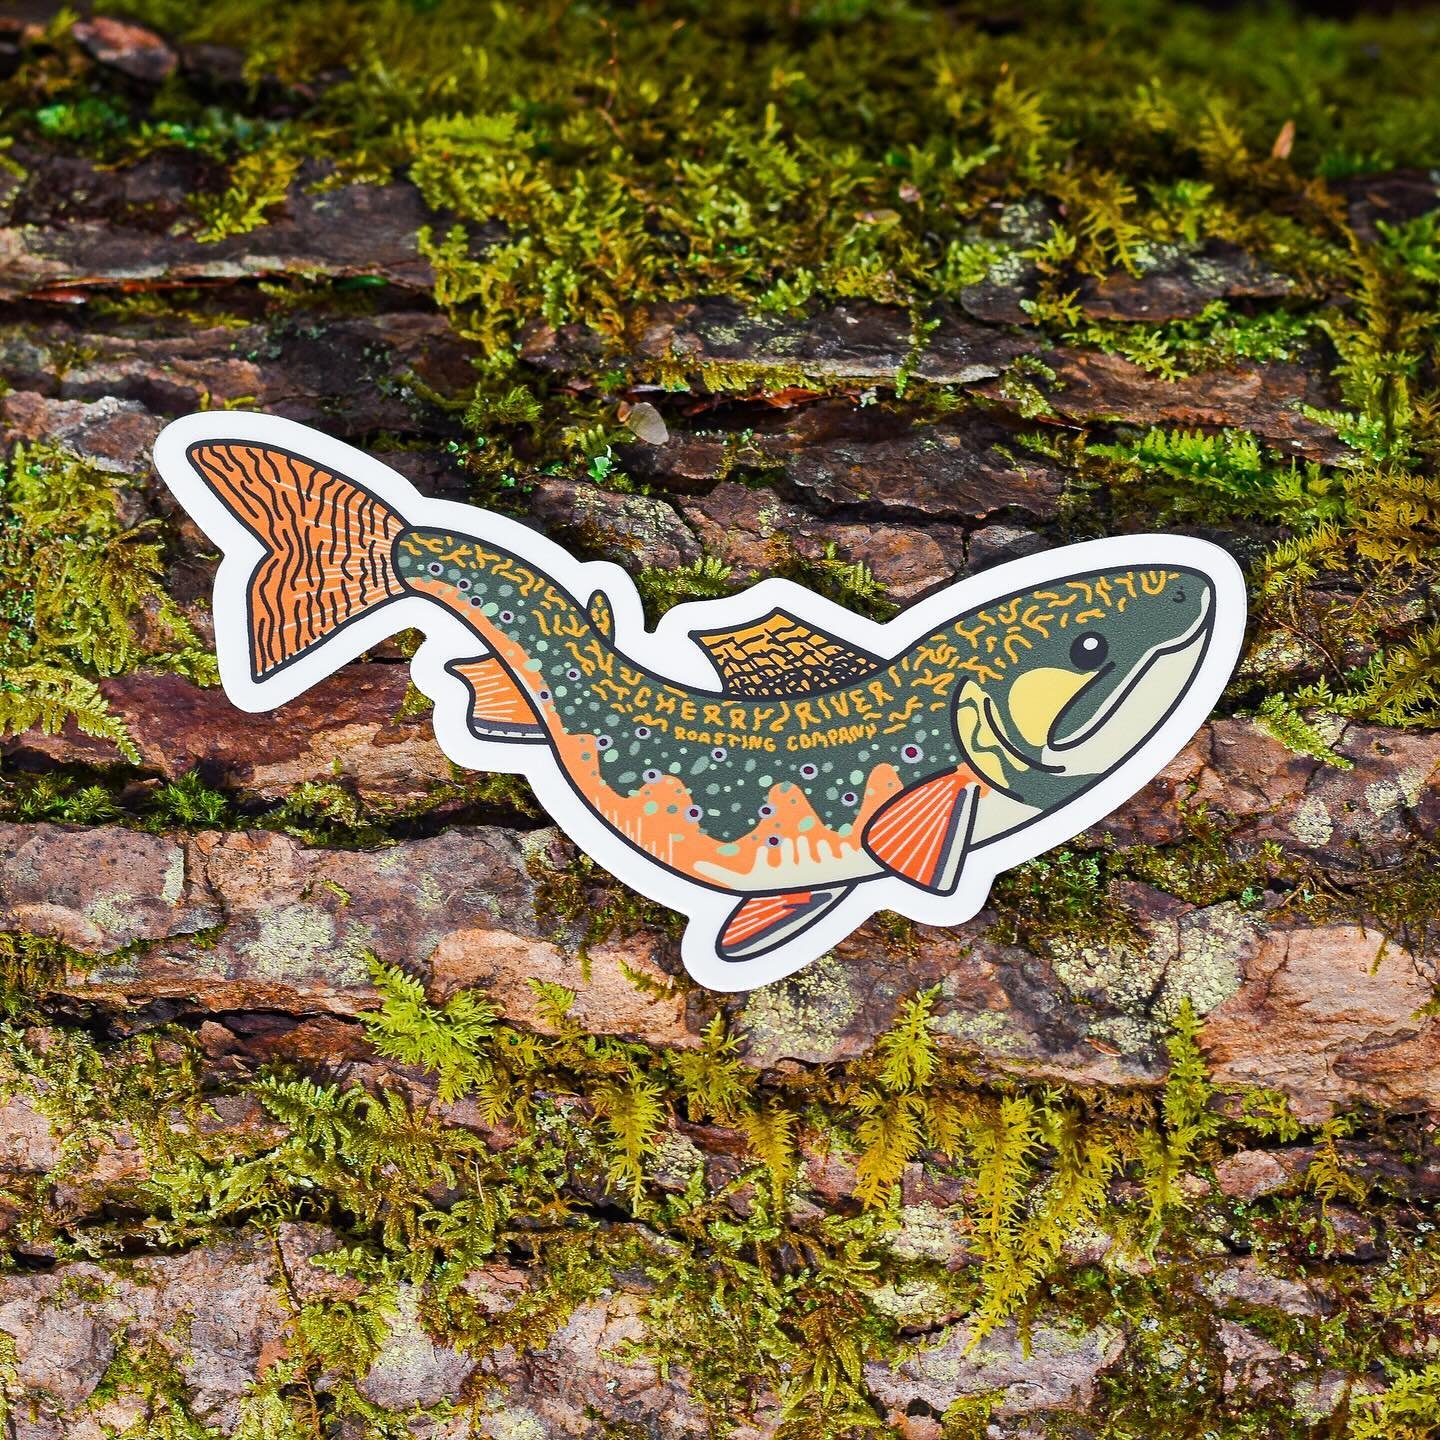 Did you know that we have three different sticker designs? You can find them on our website or in select stores that sell our coffee! ☕️

Brook Trout Sticker - The brook trout, WV&rsquo;s state fish. This beautiful fish can be found in the Cherry Riv